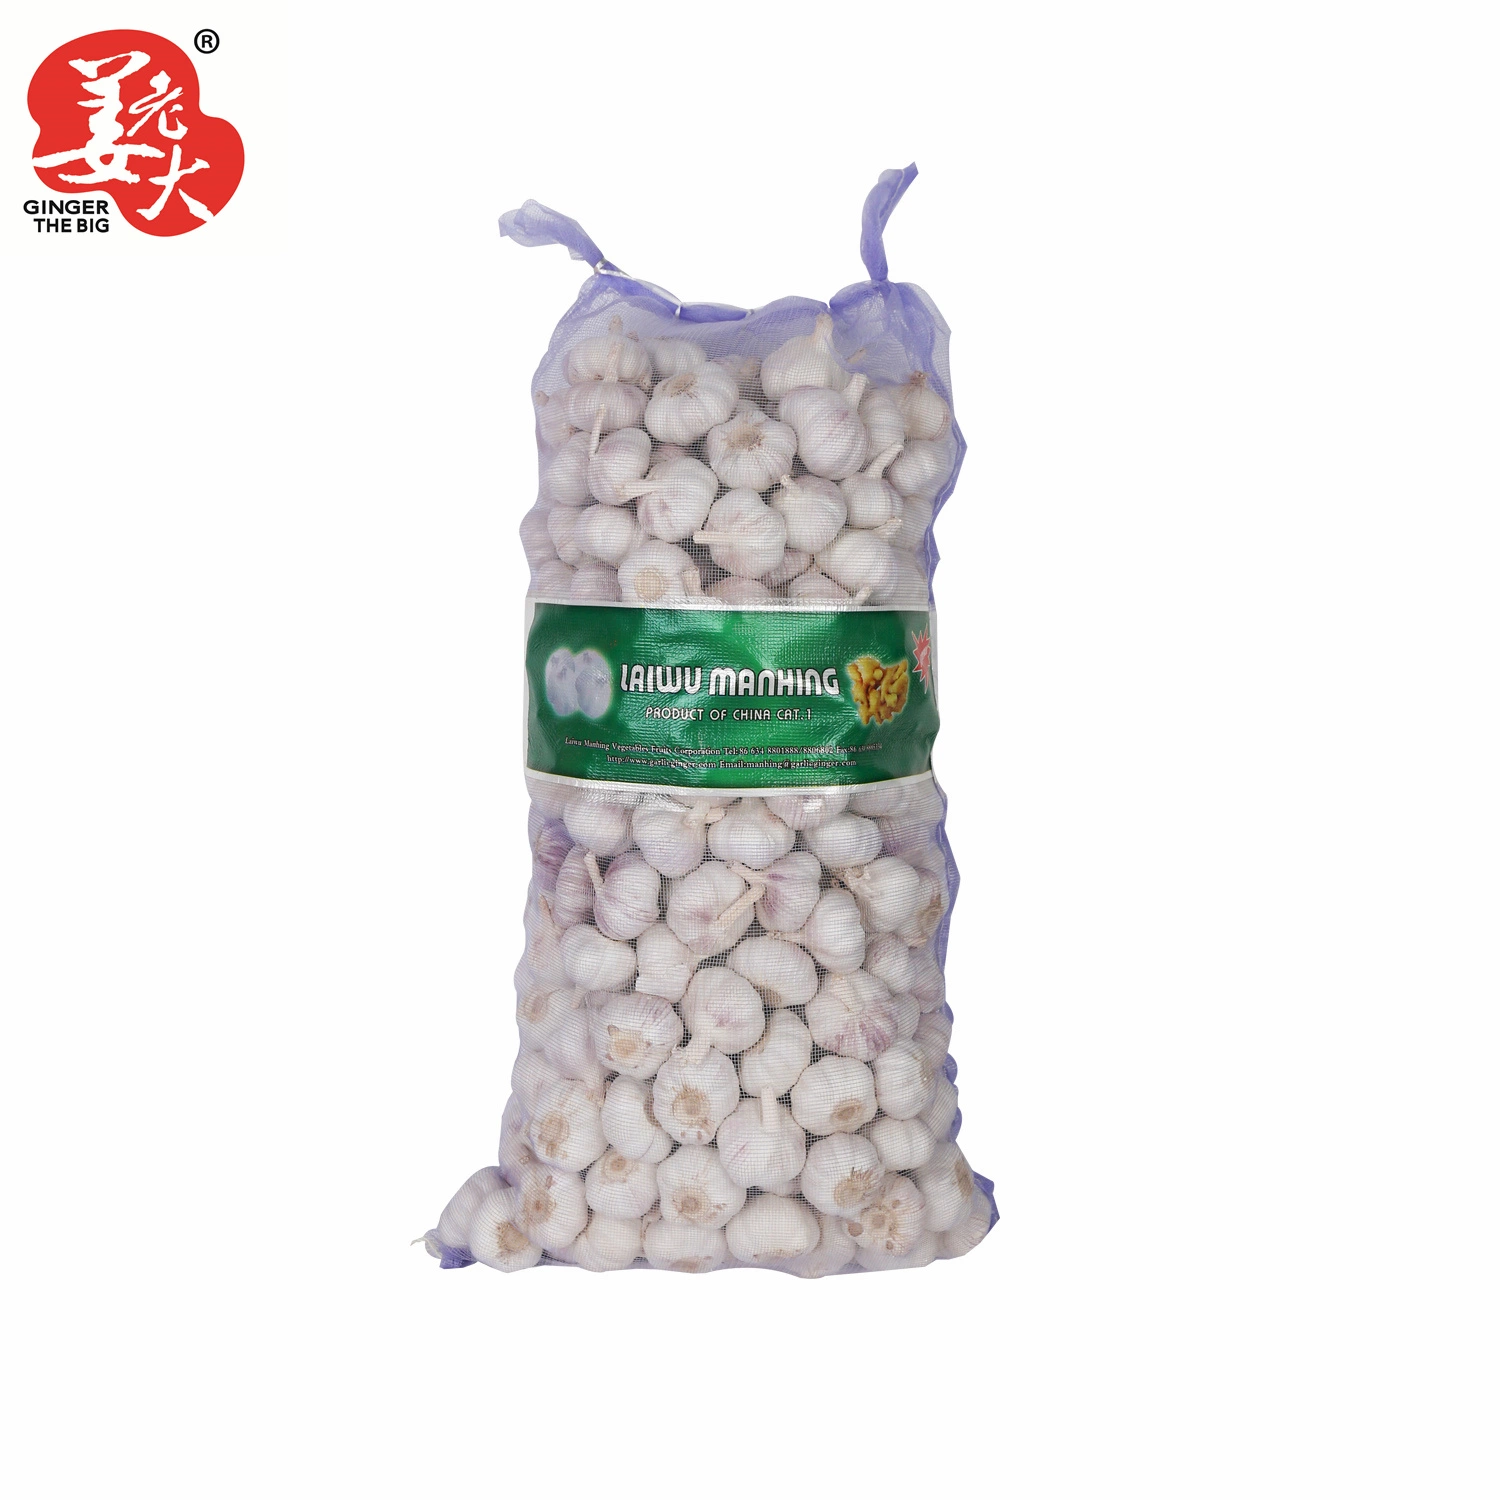 Top Quality New Crop 2021 Fresh Normal White Purple Red Chinese Garlic